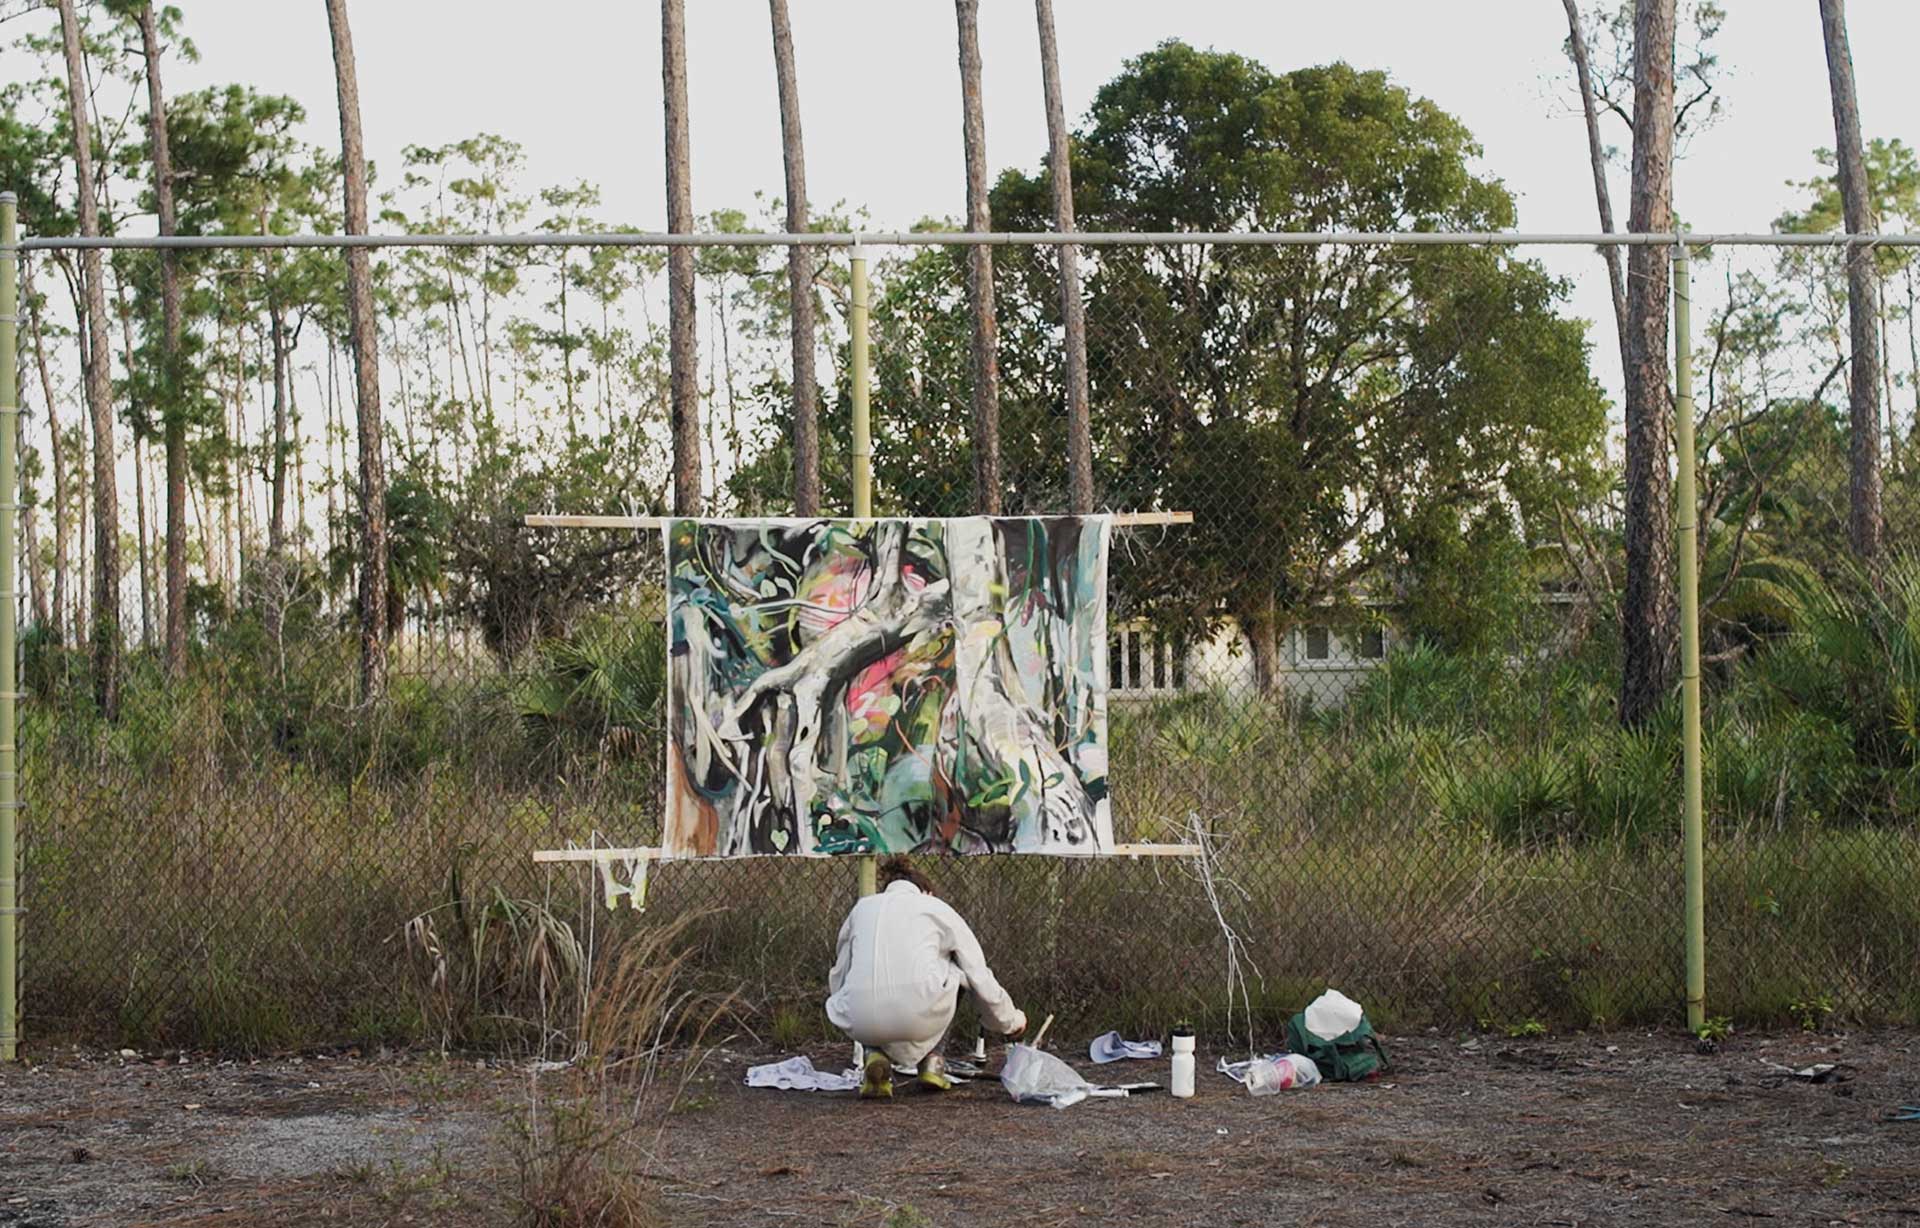 The artist, Rachel Gray, working in her outdoor studio in an abandoned basketball court. Her canvas hangs on the chain link fence. The artist is crouched before the painting as she applies paint to her brush. The painting is of a tree.